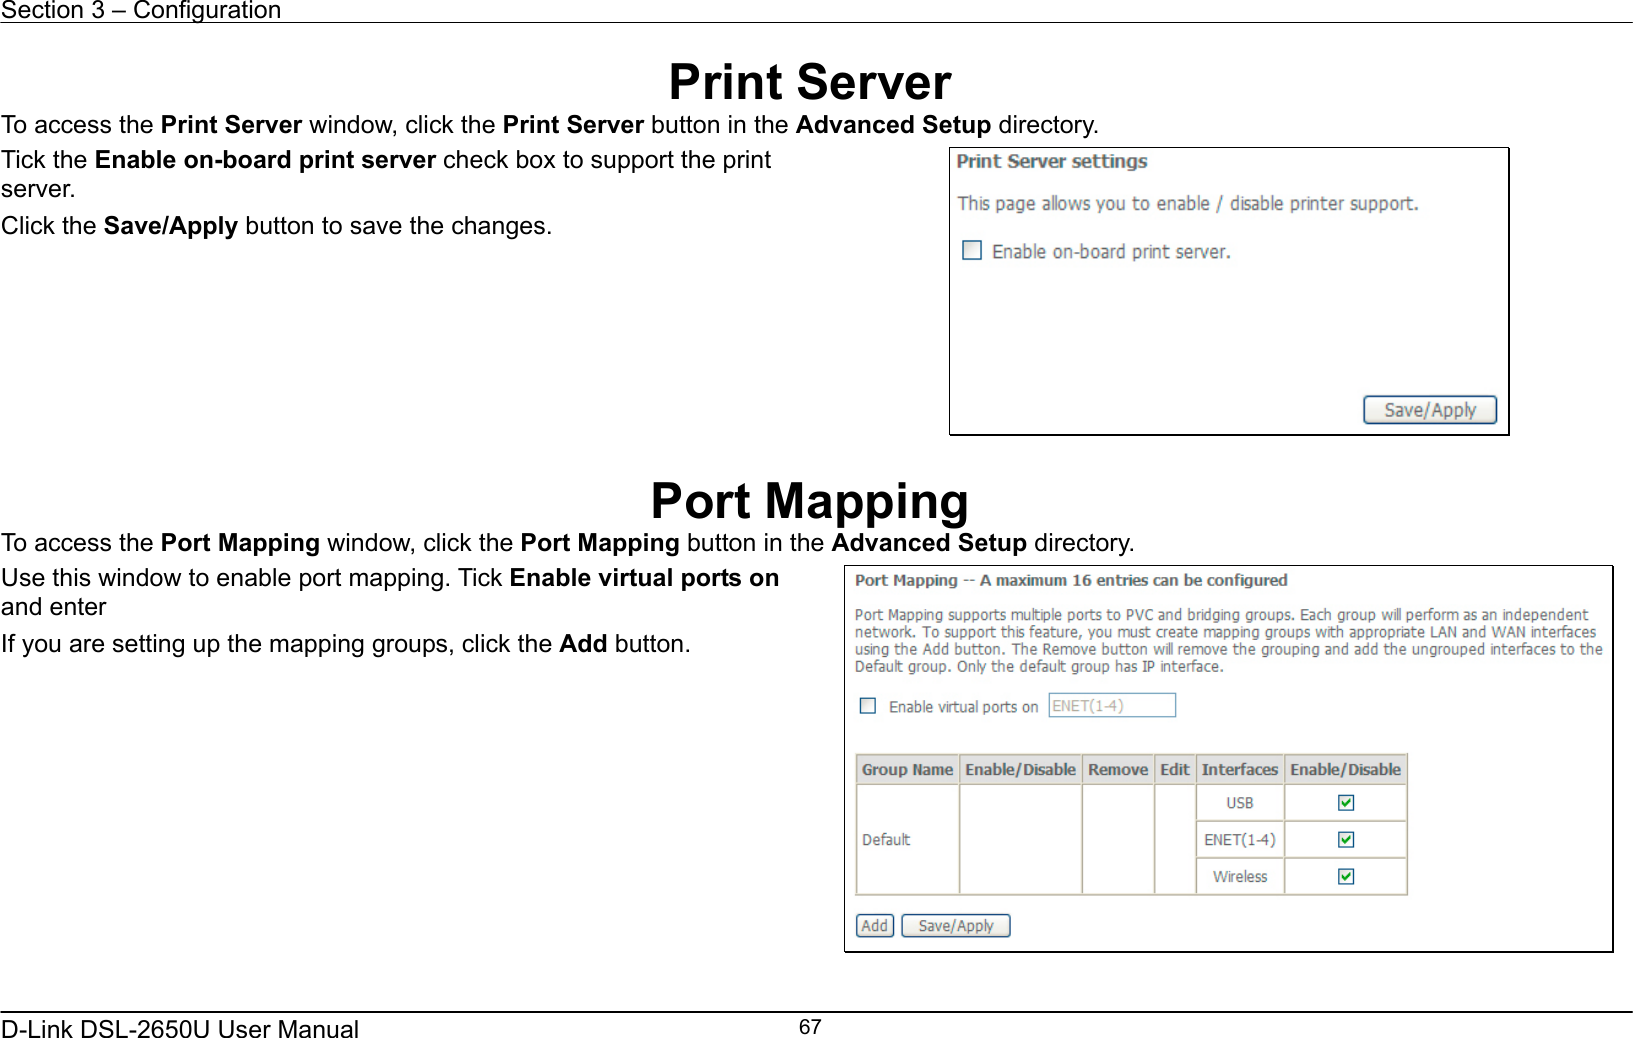 Section 3 – Configuration   D-Link DSL-2650U User Manual    67Print Server To access the Print Server window, click the Print Server button in the Advanced Setup directory. Tick the Enable on-board print server check box to support the print server. Click the Save/Apply button to save the changes.    Port Mapping To access the Port Mapping window, click the Port Mapping button in the Advanced Setup directory. Use this window to enable port mapping. Tick Enable virtual ports on and enter   If you are setting up the mapping groups, click the Add button.       